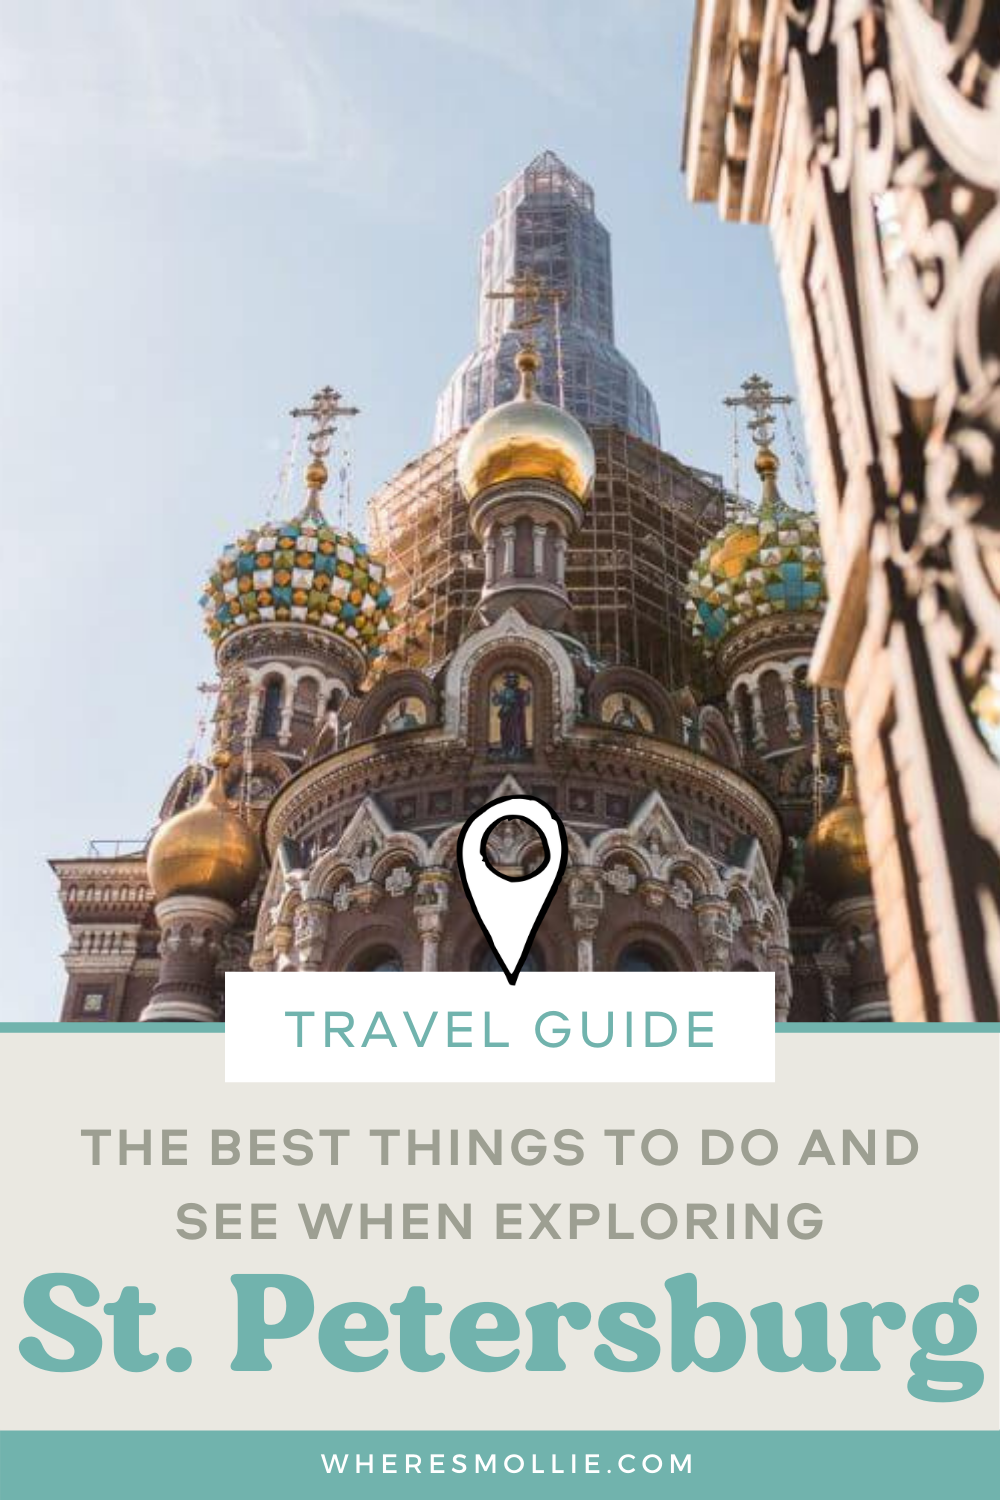 The best things to do in St. Petersburg, Russia